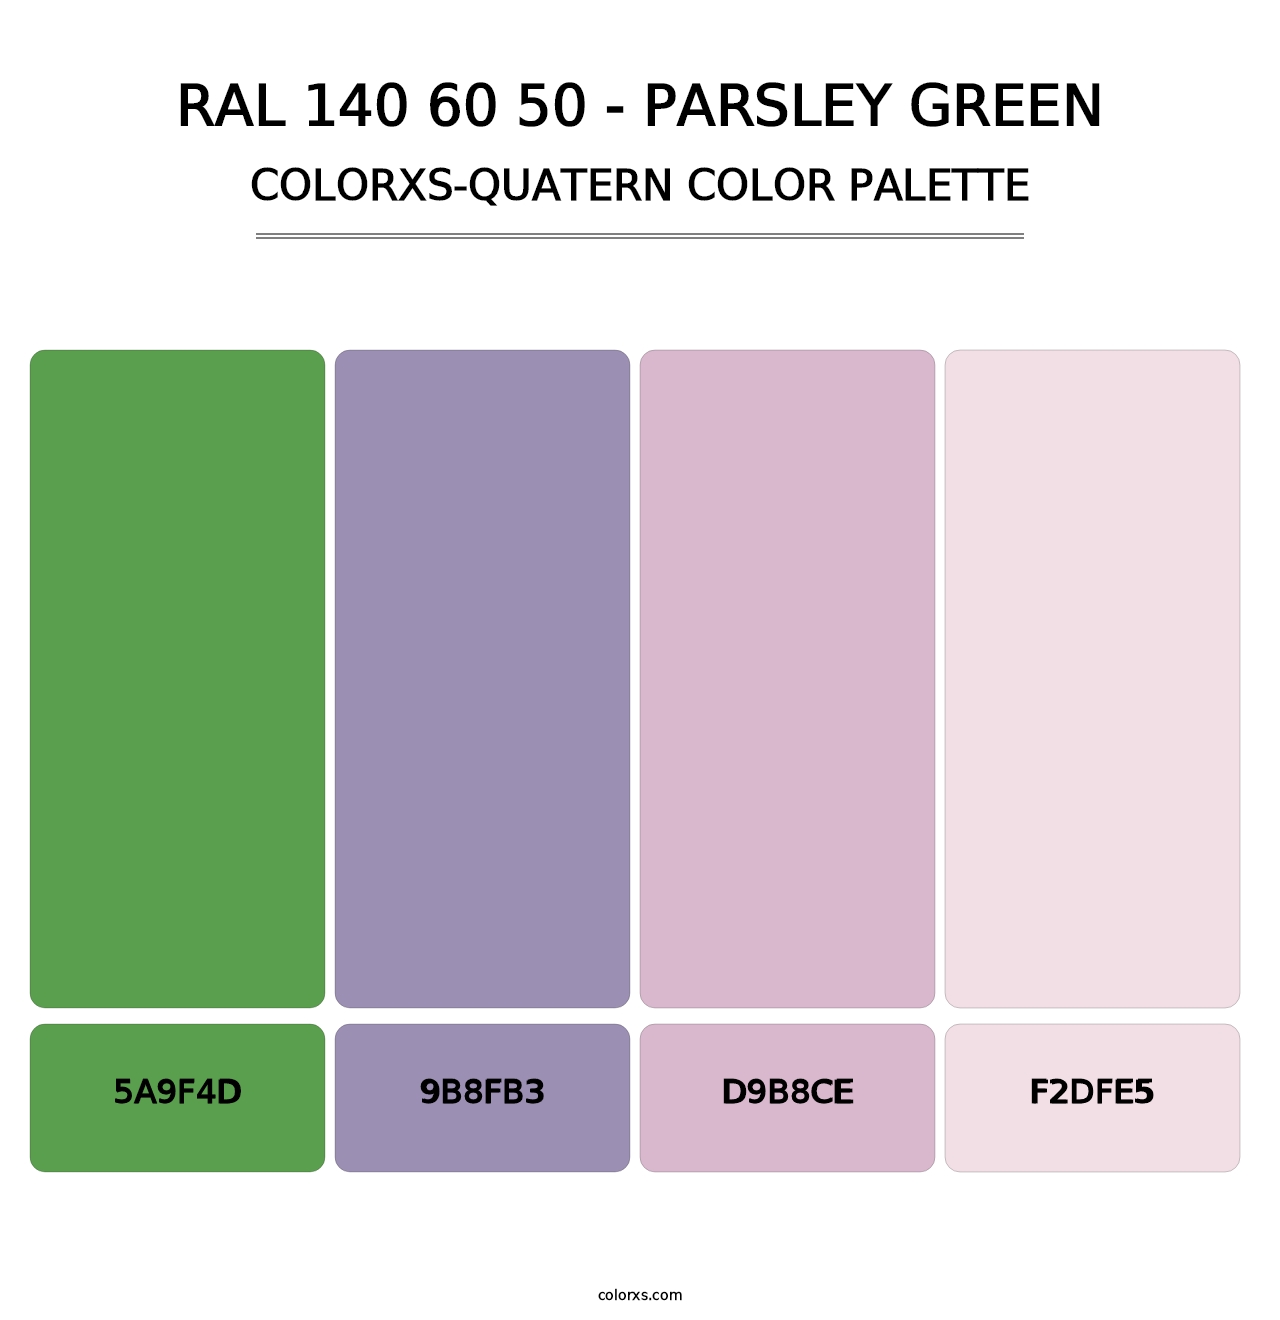 RAL 140 60 50 - Parsley Green - Colorxs Quatern Palette